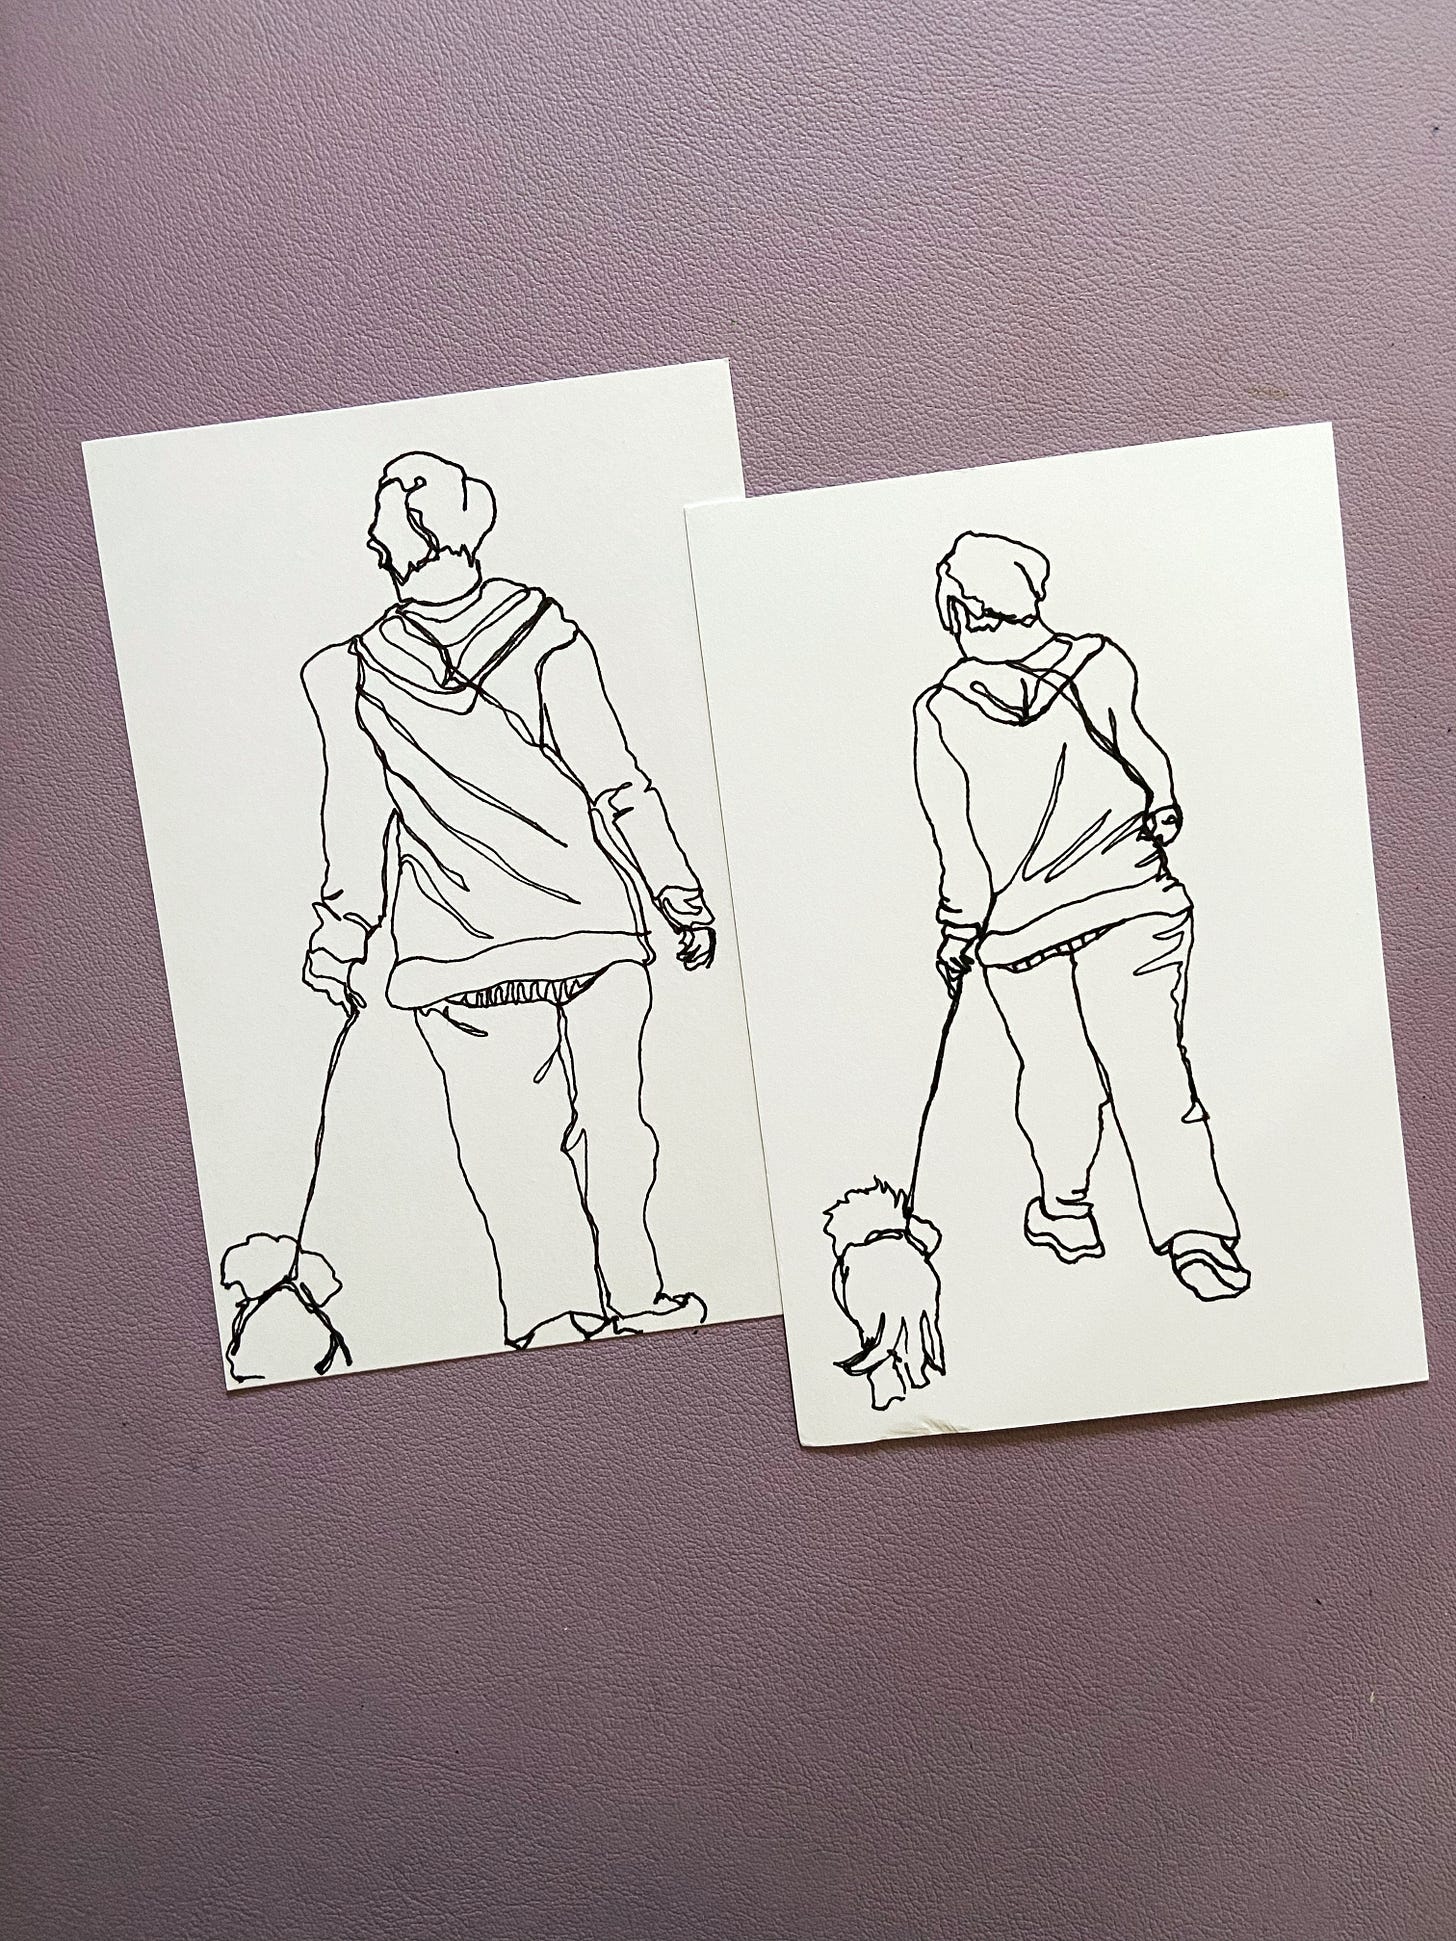 Simple one-line contour drawings based on photos of someone walking ahead of me.